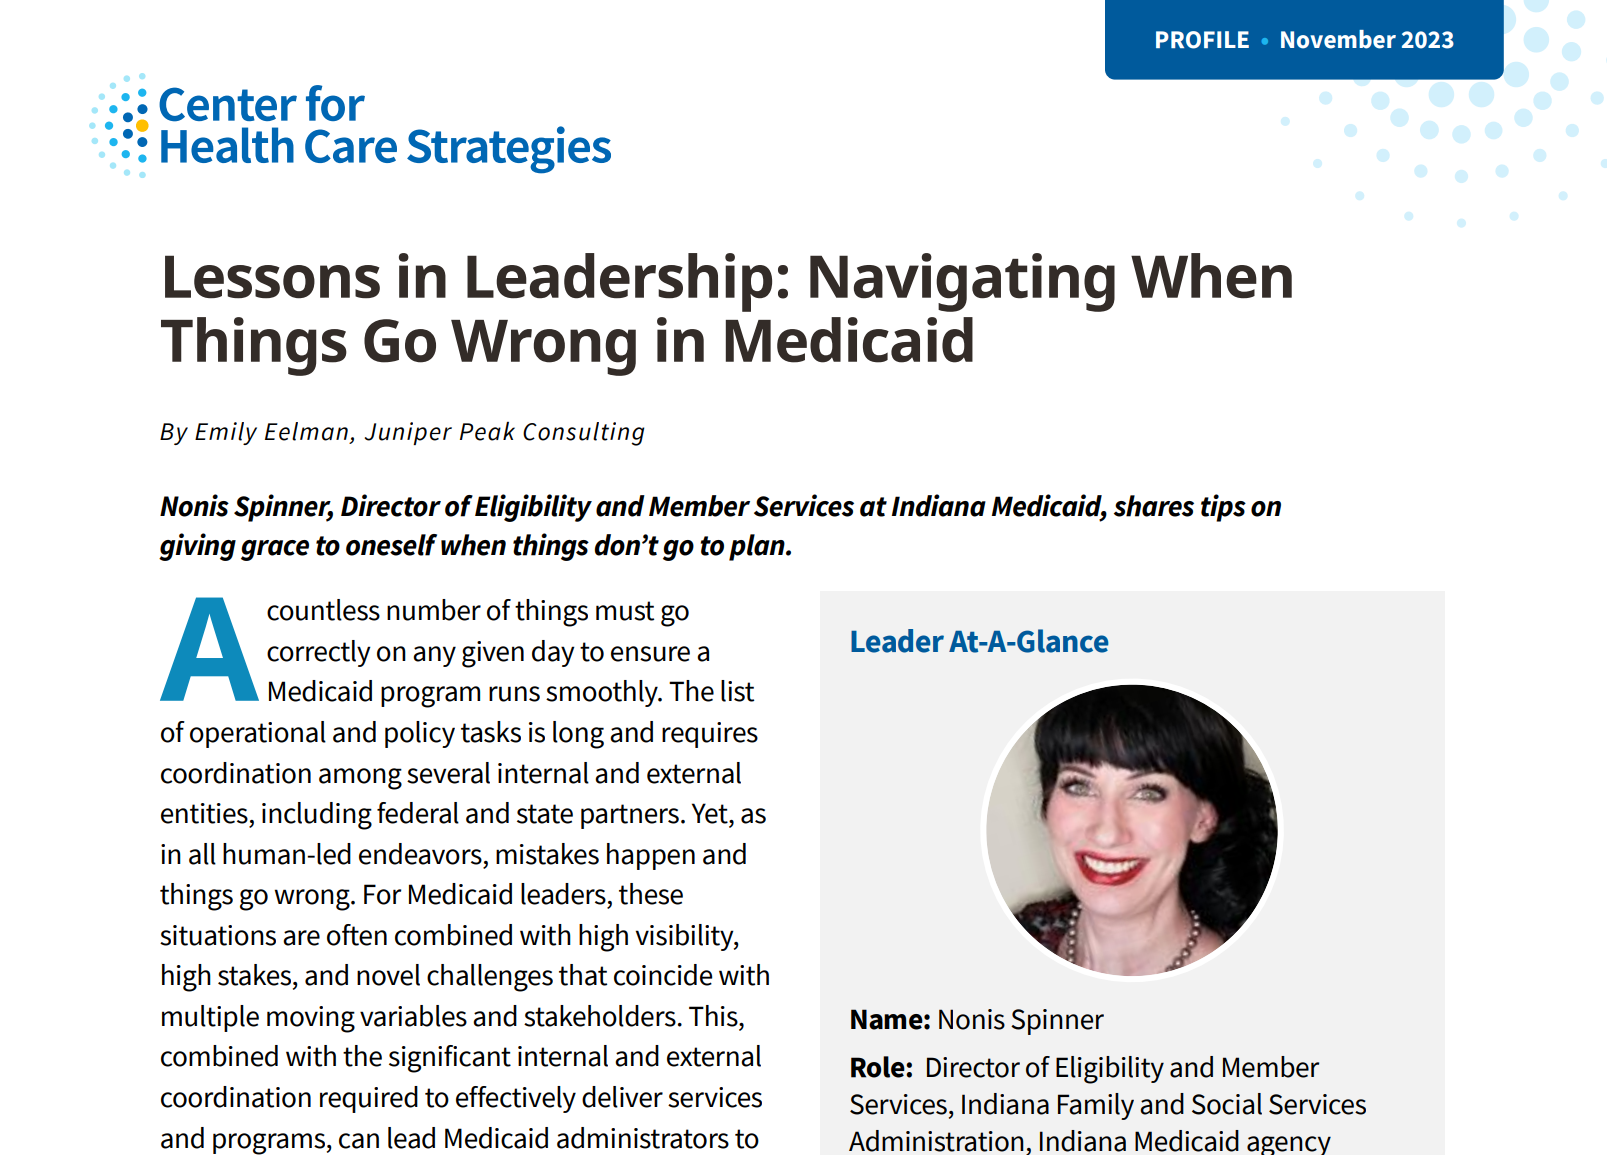 Navigating When Things Go Wrong in Medicaid